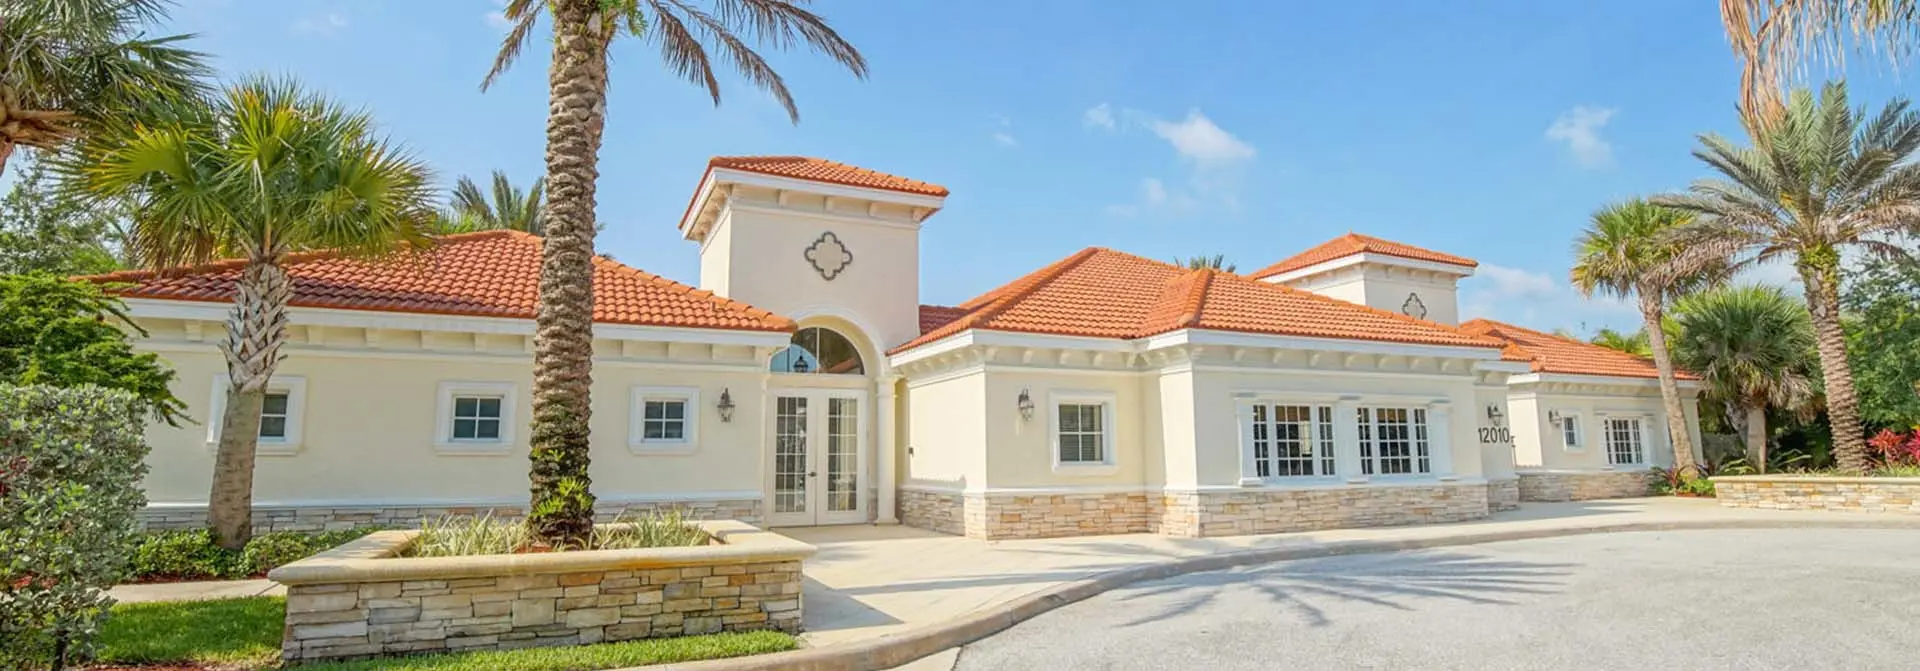 Paloma Palm Beach Gardens | Homes for Sale in Paloma Palm Beach Gardens